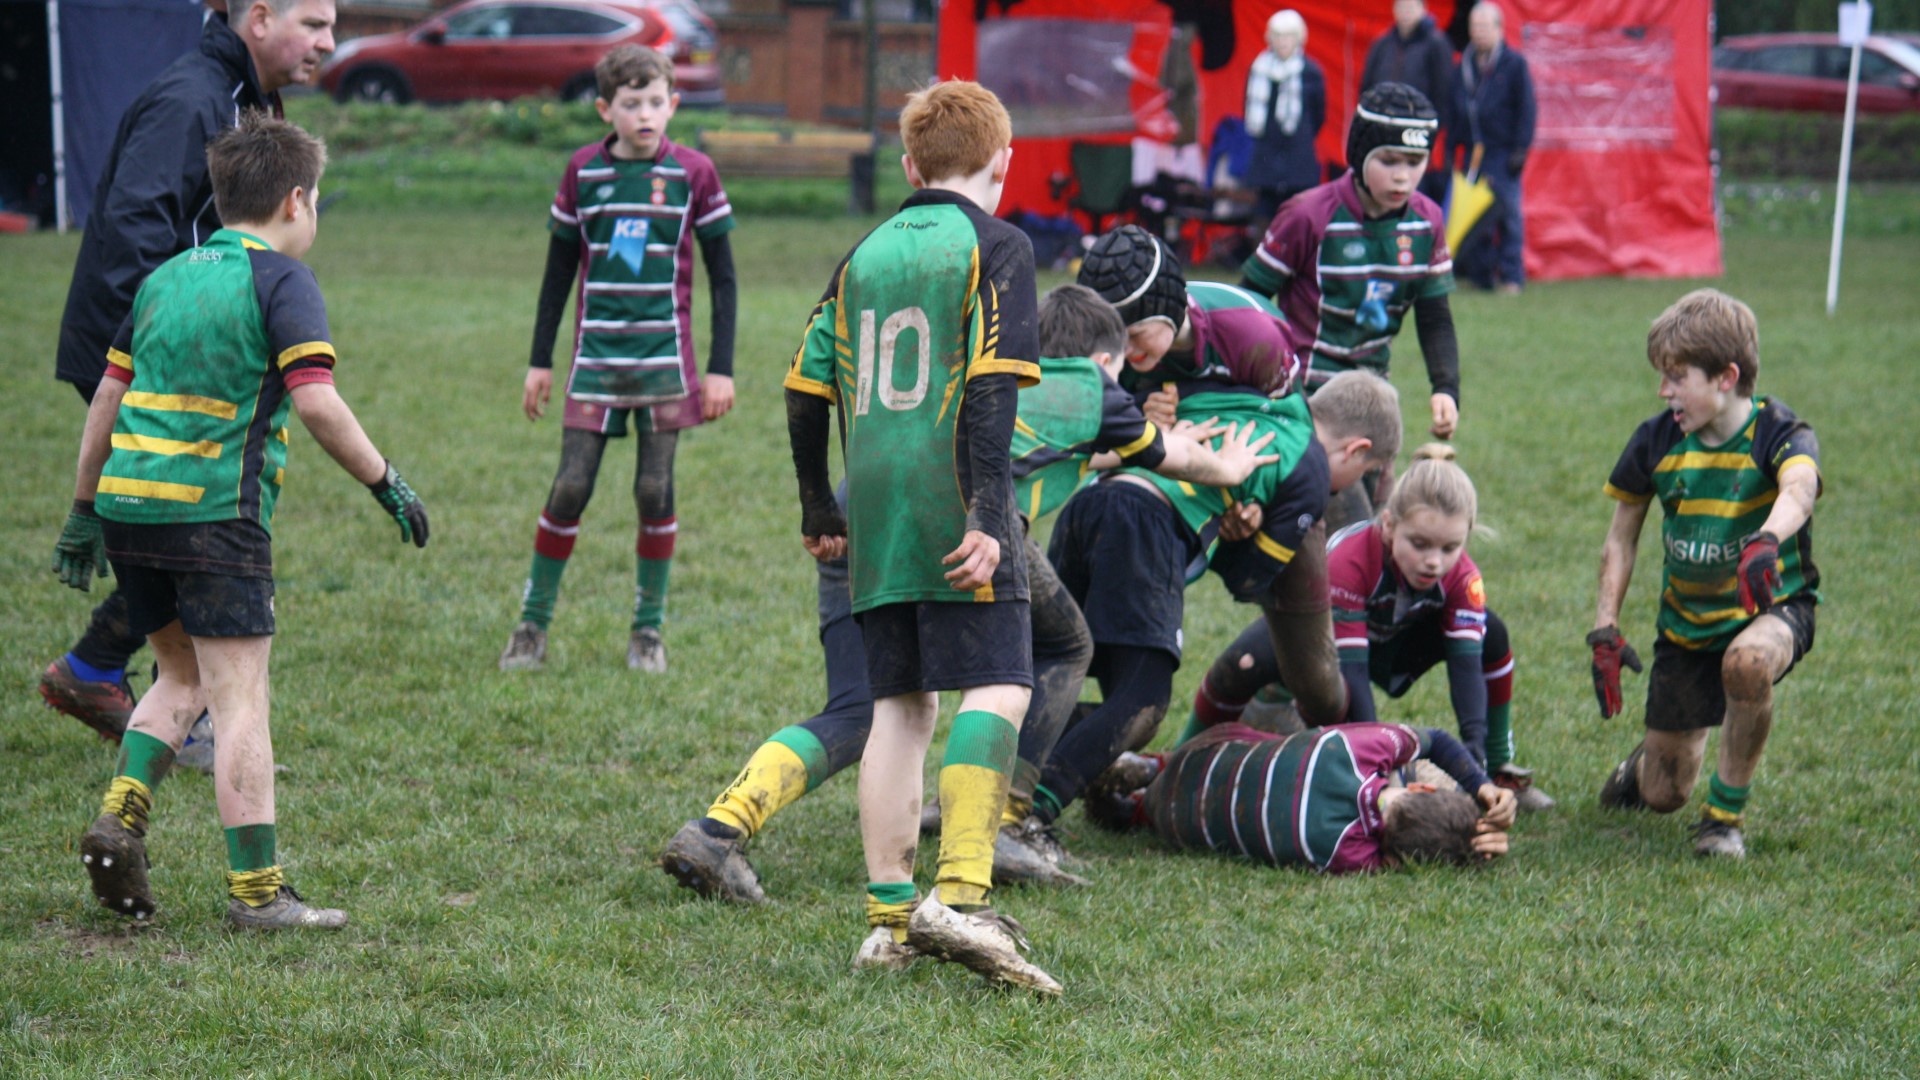 Image of Guildfordians RFC (GRFC) Minis Rugby team located on Stoke Park Guildford